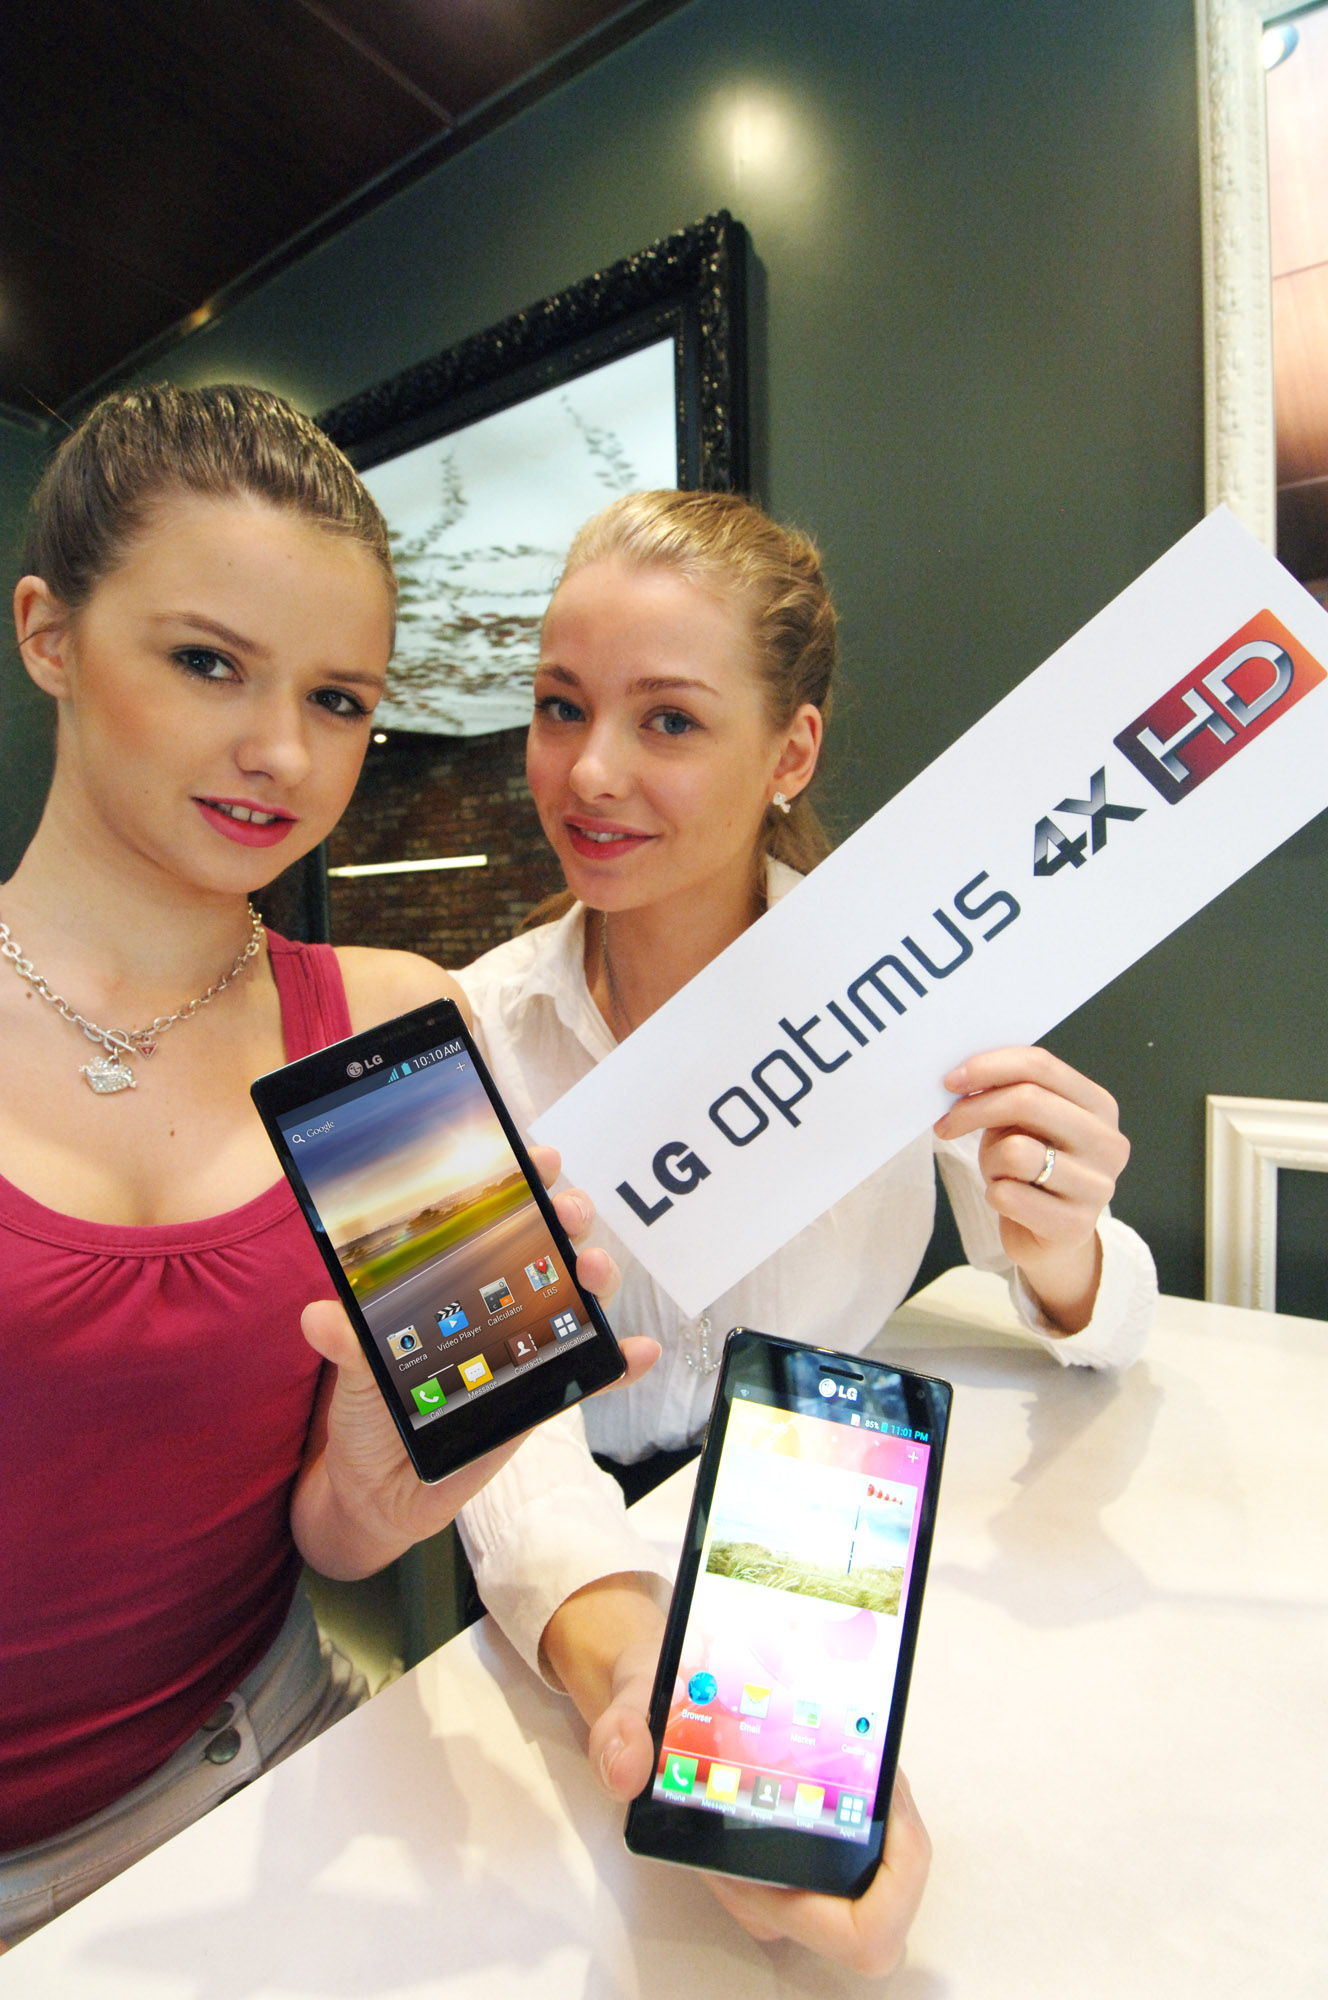 Two models hold up a LG Optimus 4X HD each while one also holds up the LG Optimus 4X HD logo in her other hand